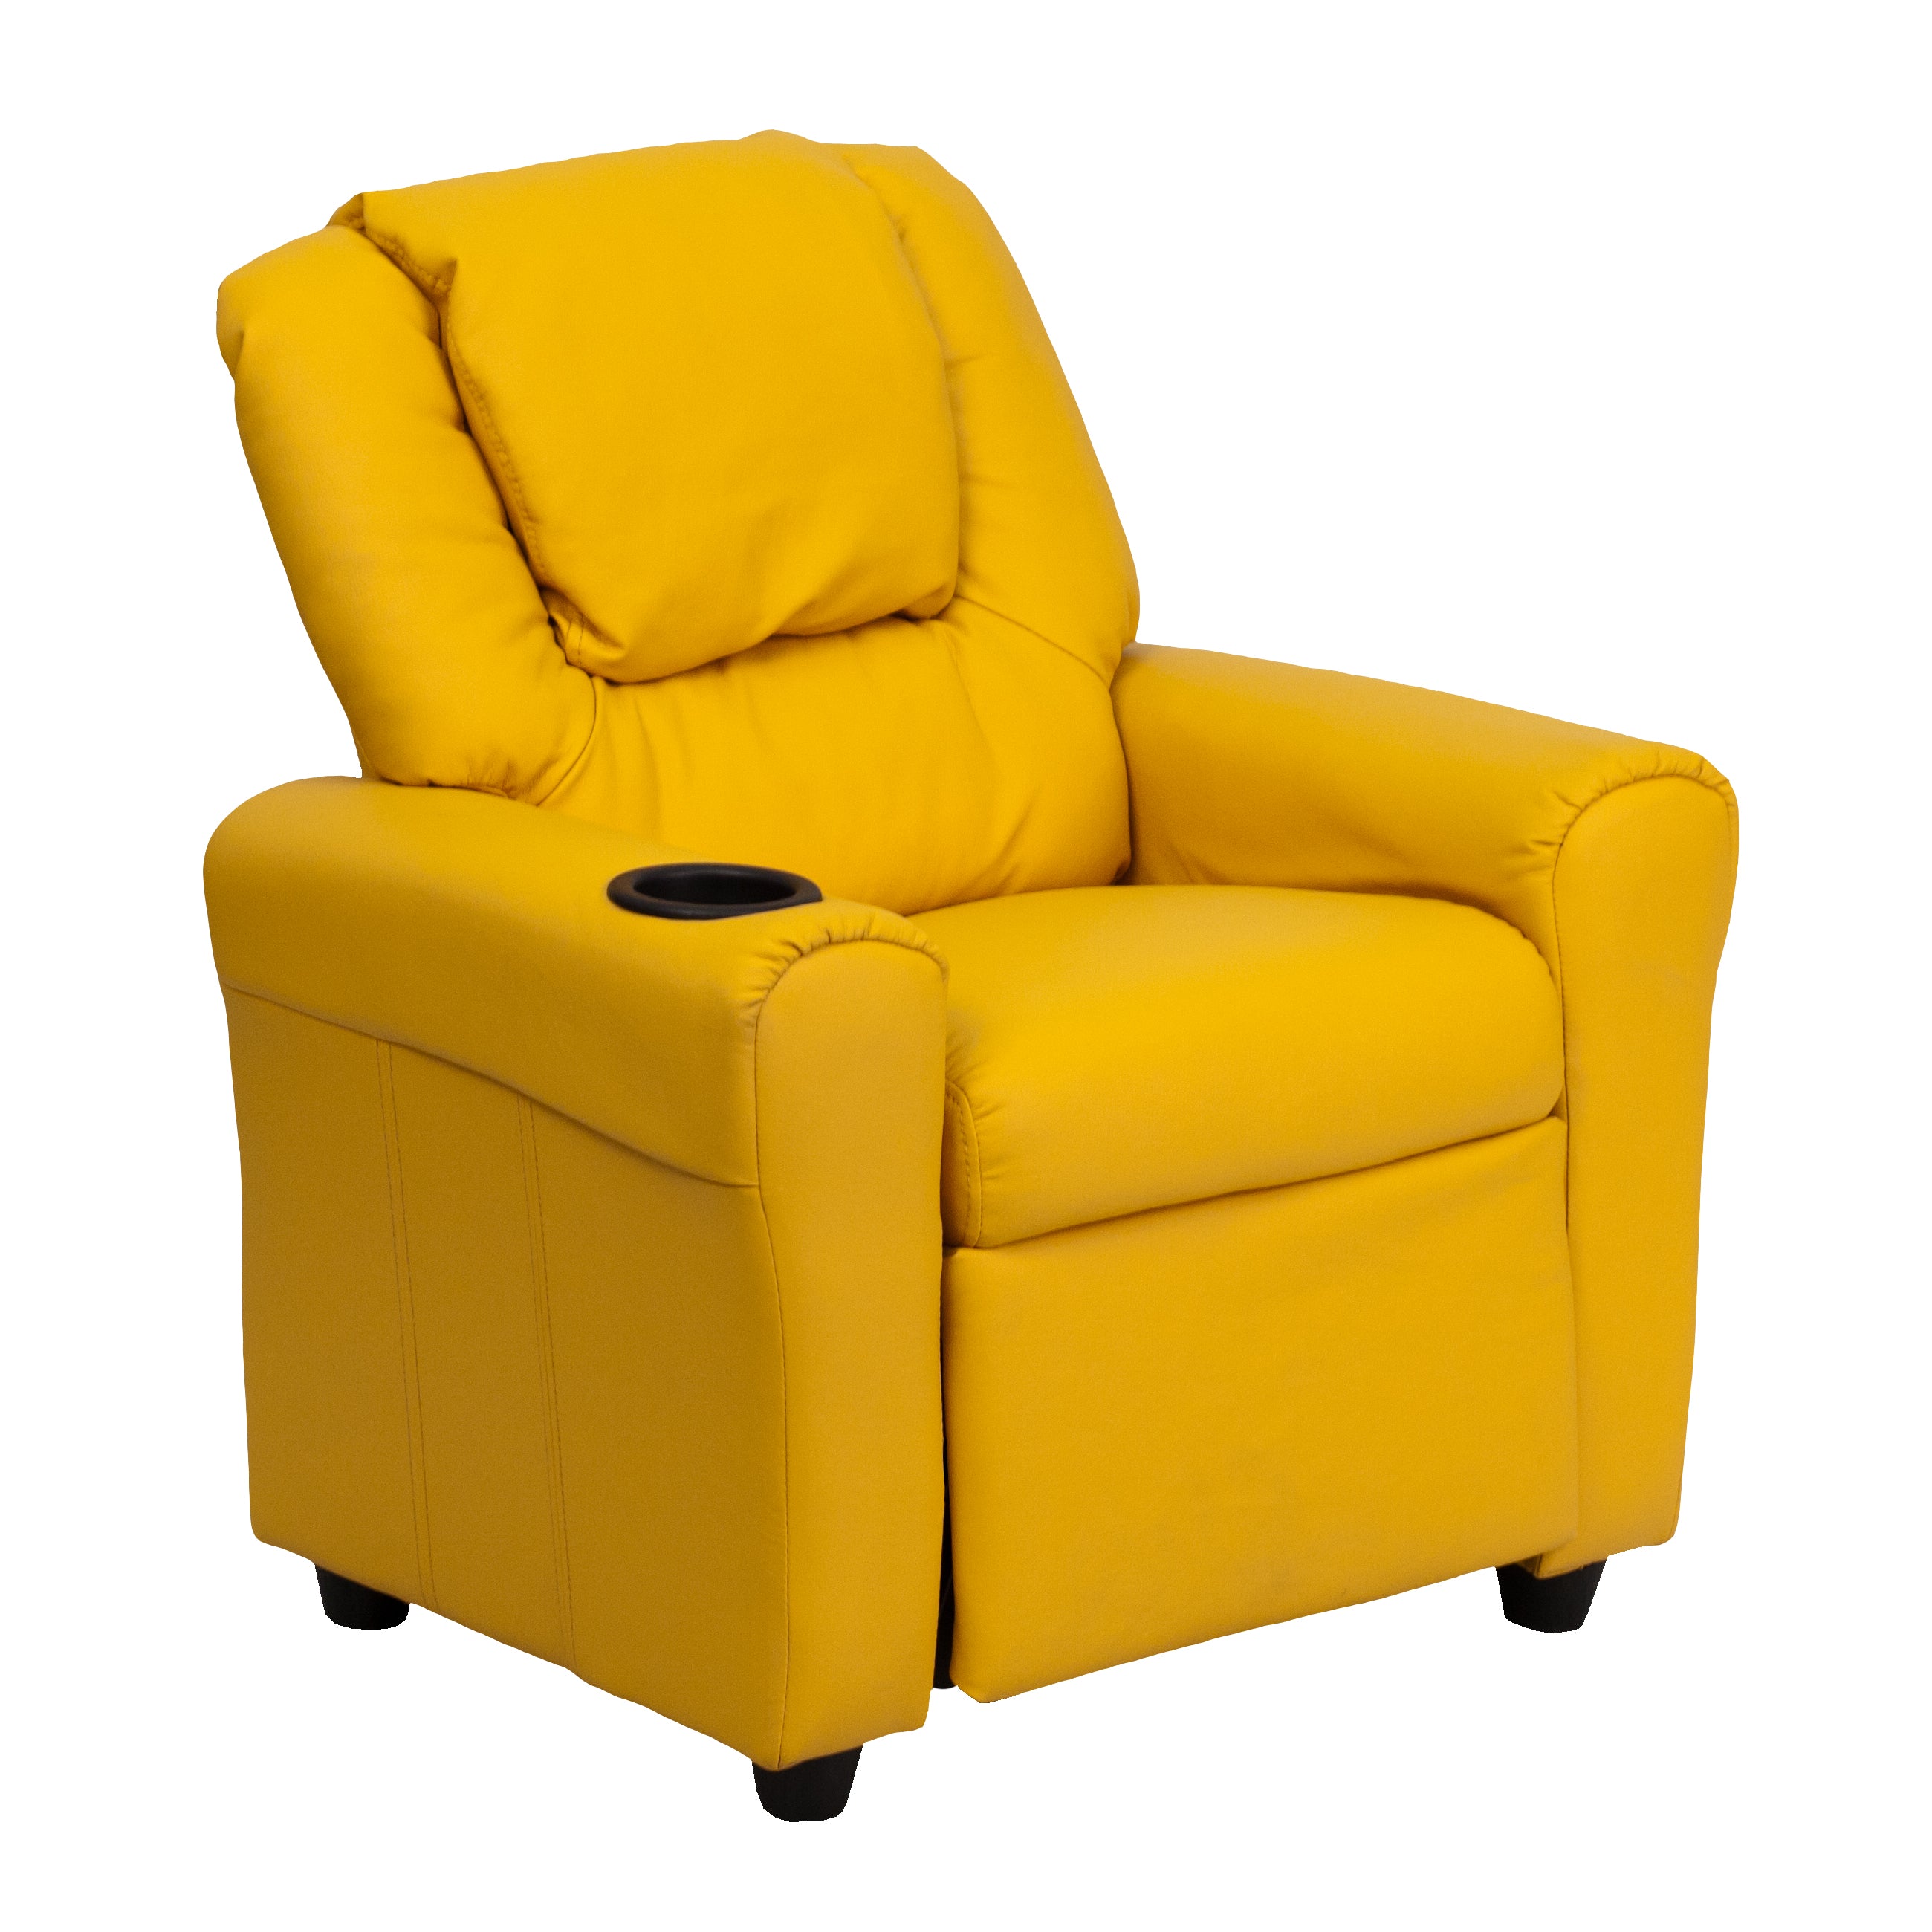 Contemporary Kids Recliner with Cup Holder and Headrest-Kids Recliner-Flash Furniture-Wall2Wall Furnishings